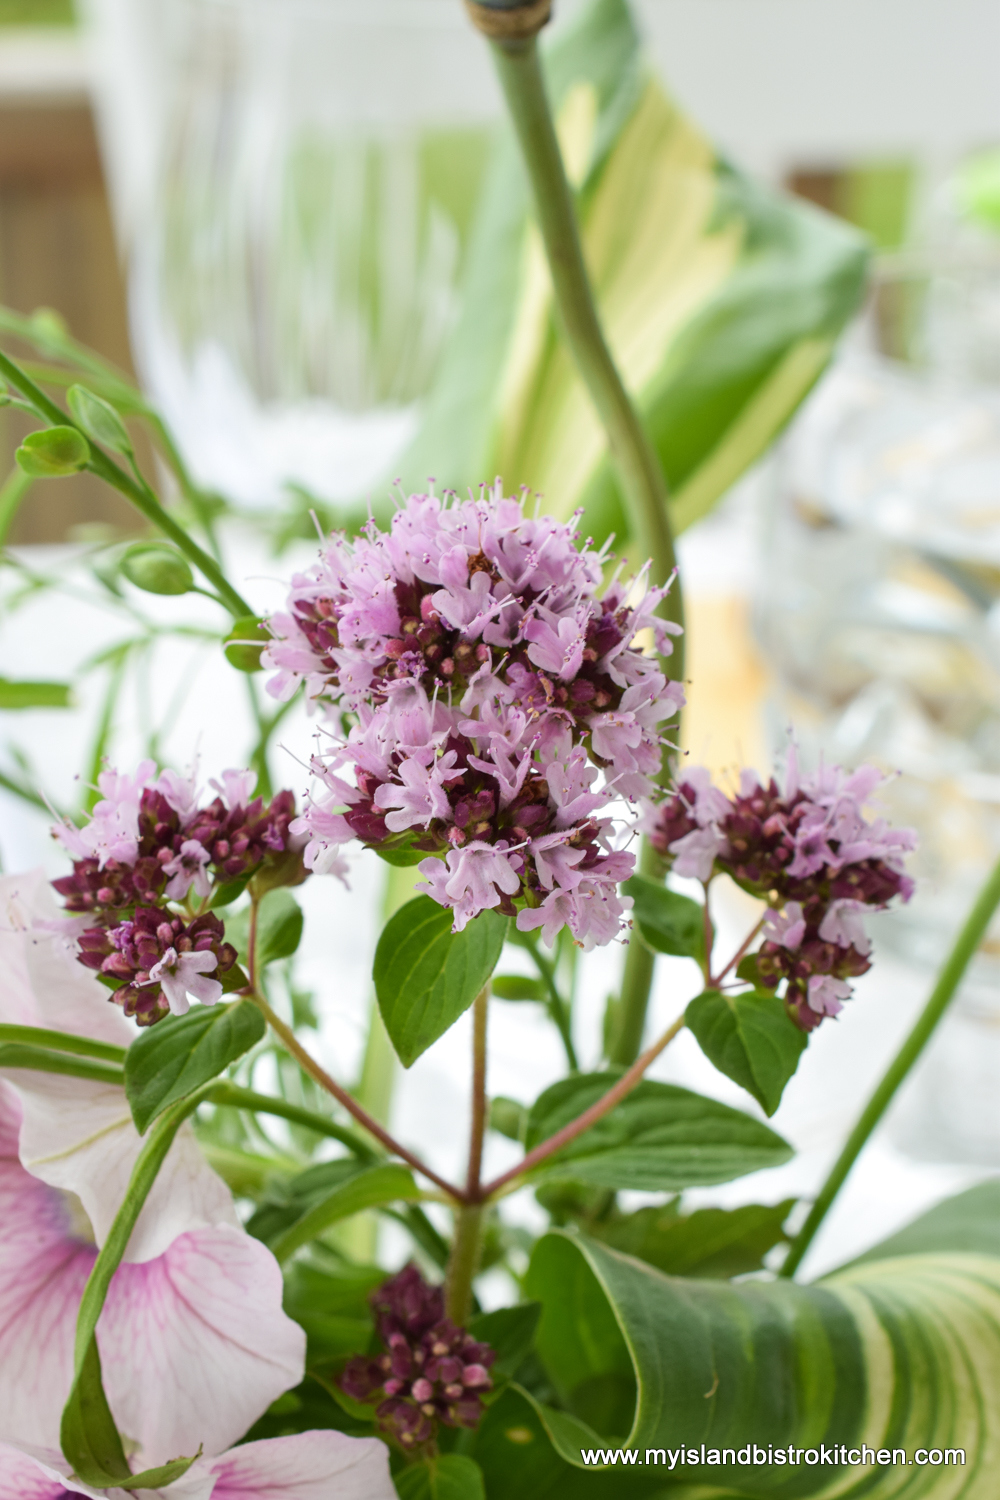 Fresh herbs, such as oregano, are great in casual floral arrangements